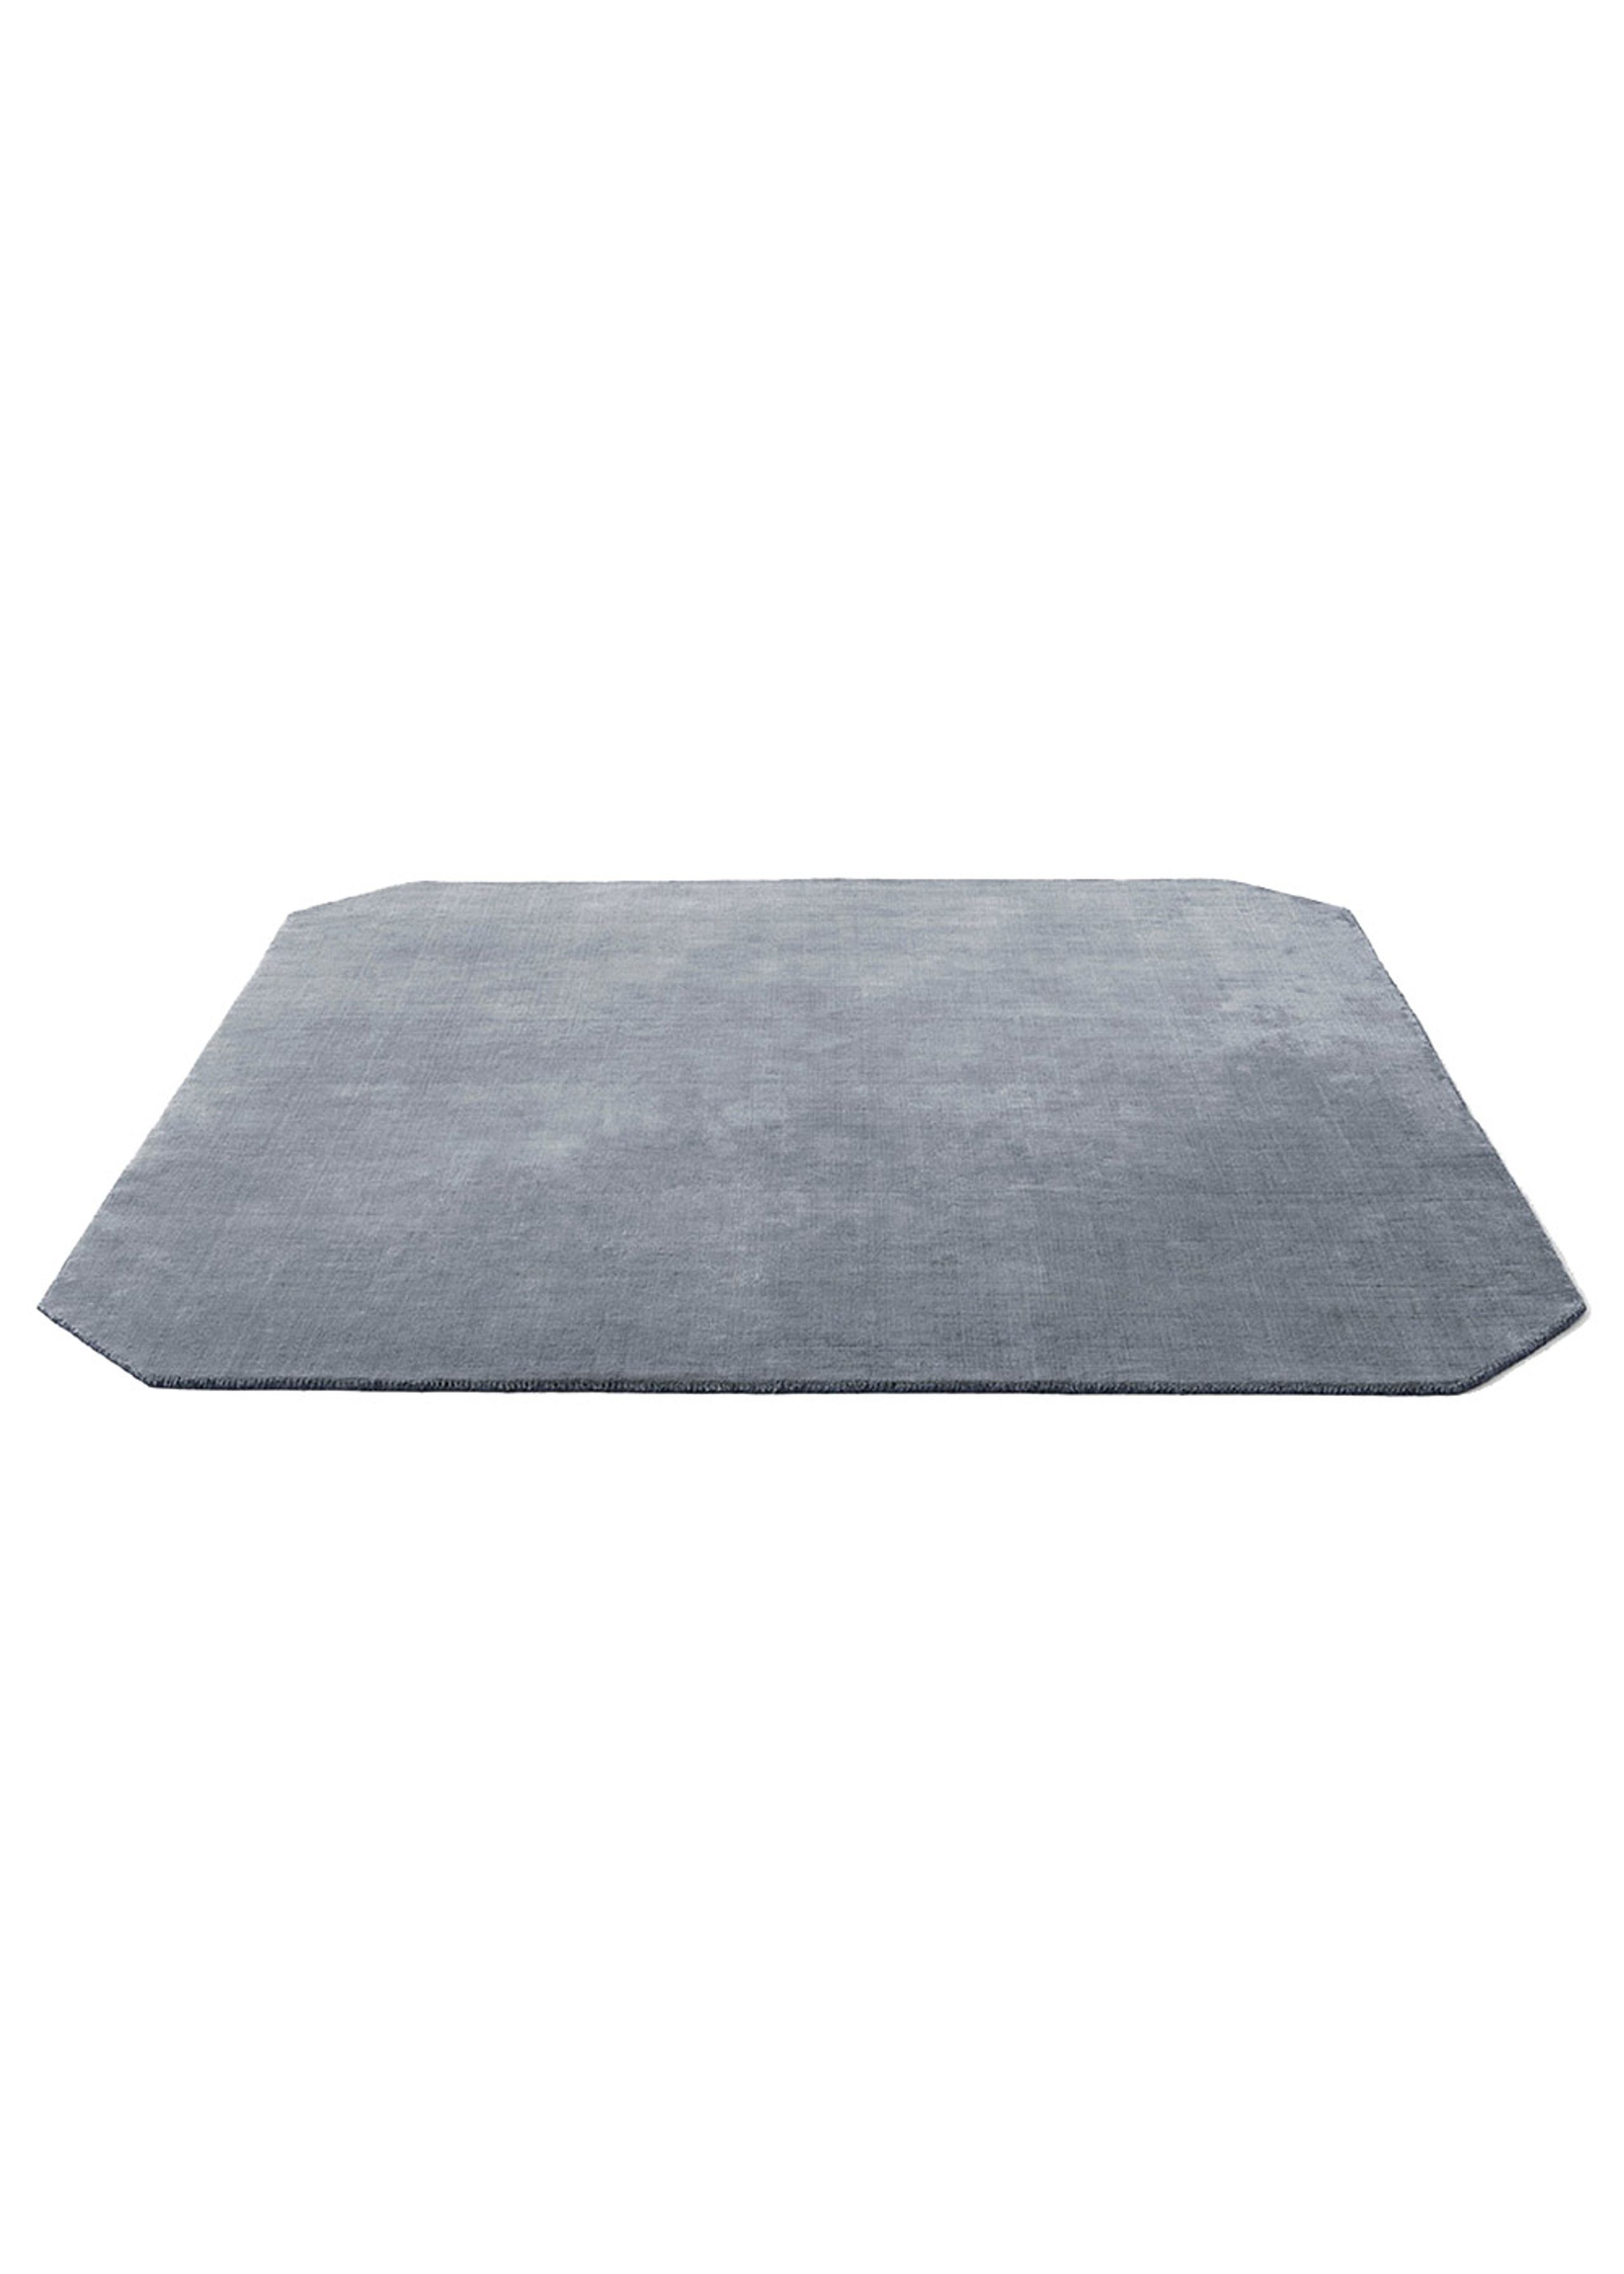 &tradition - Tapete - The Moor Rug - Grey Blue Thunder / AP6